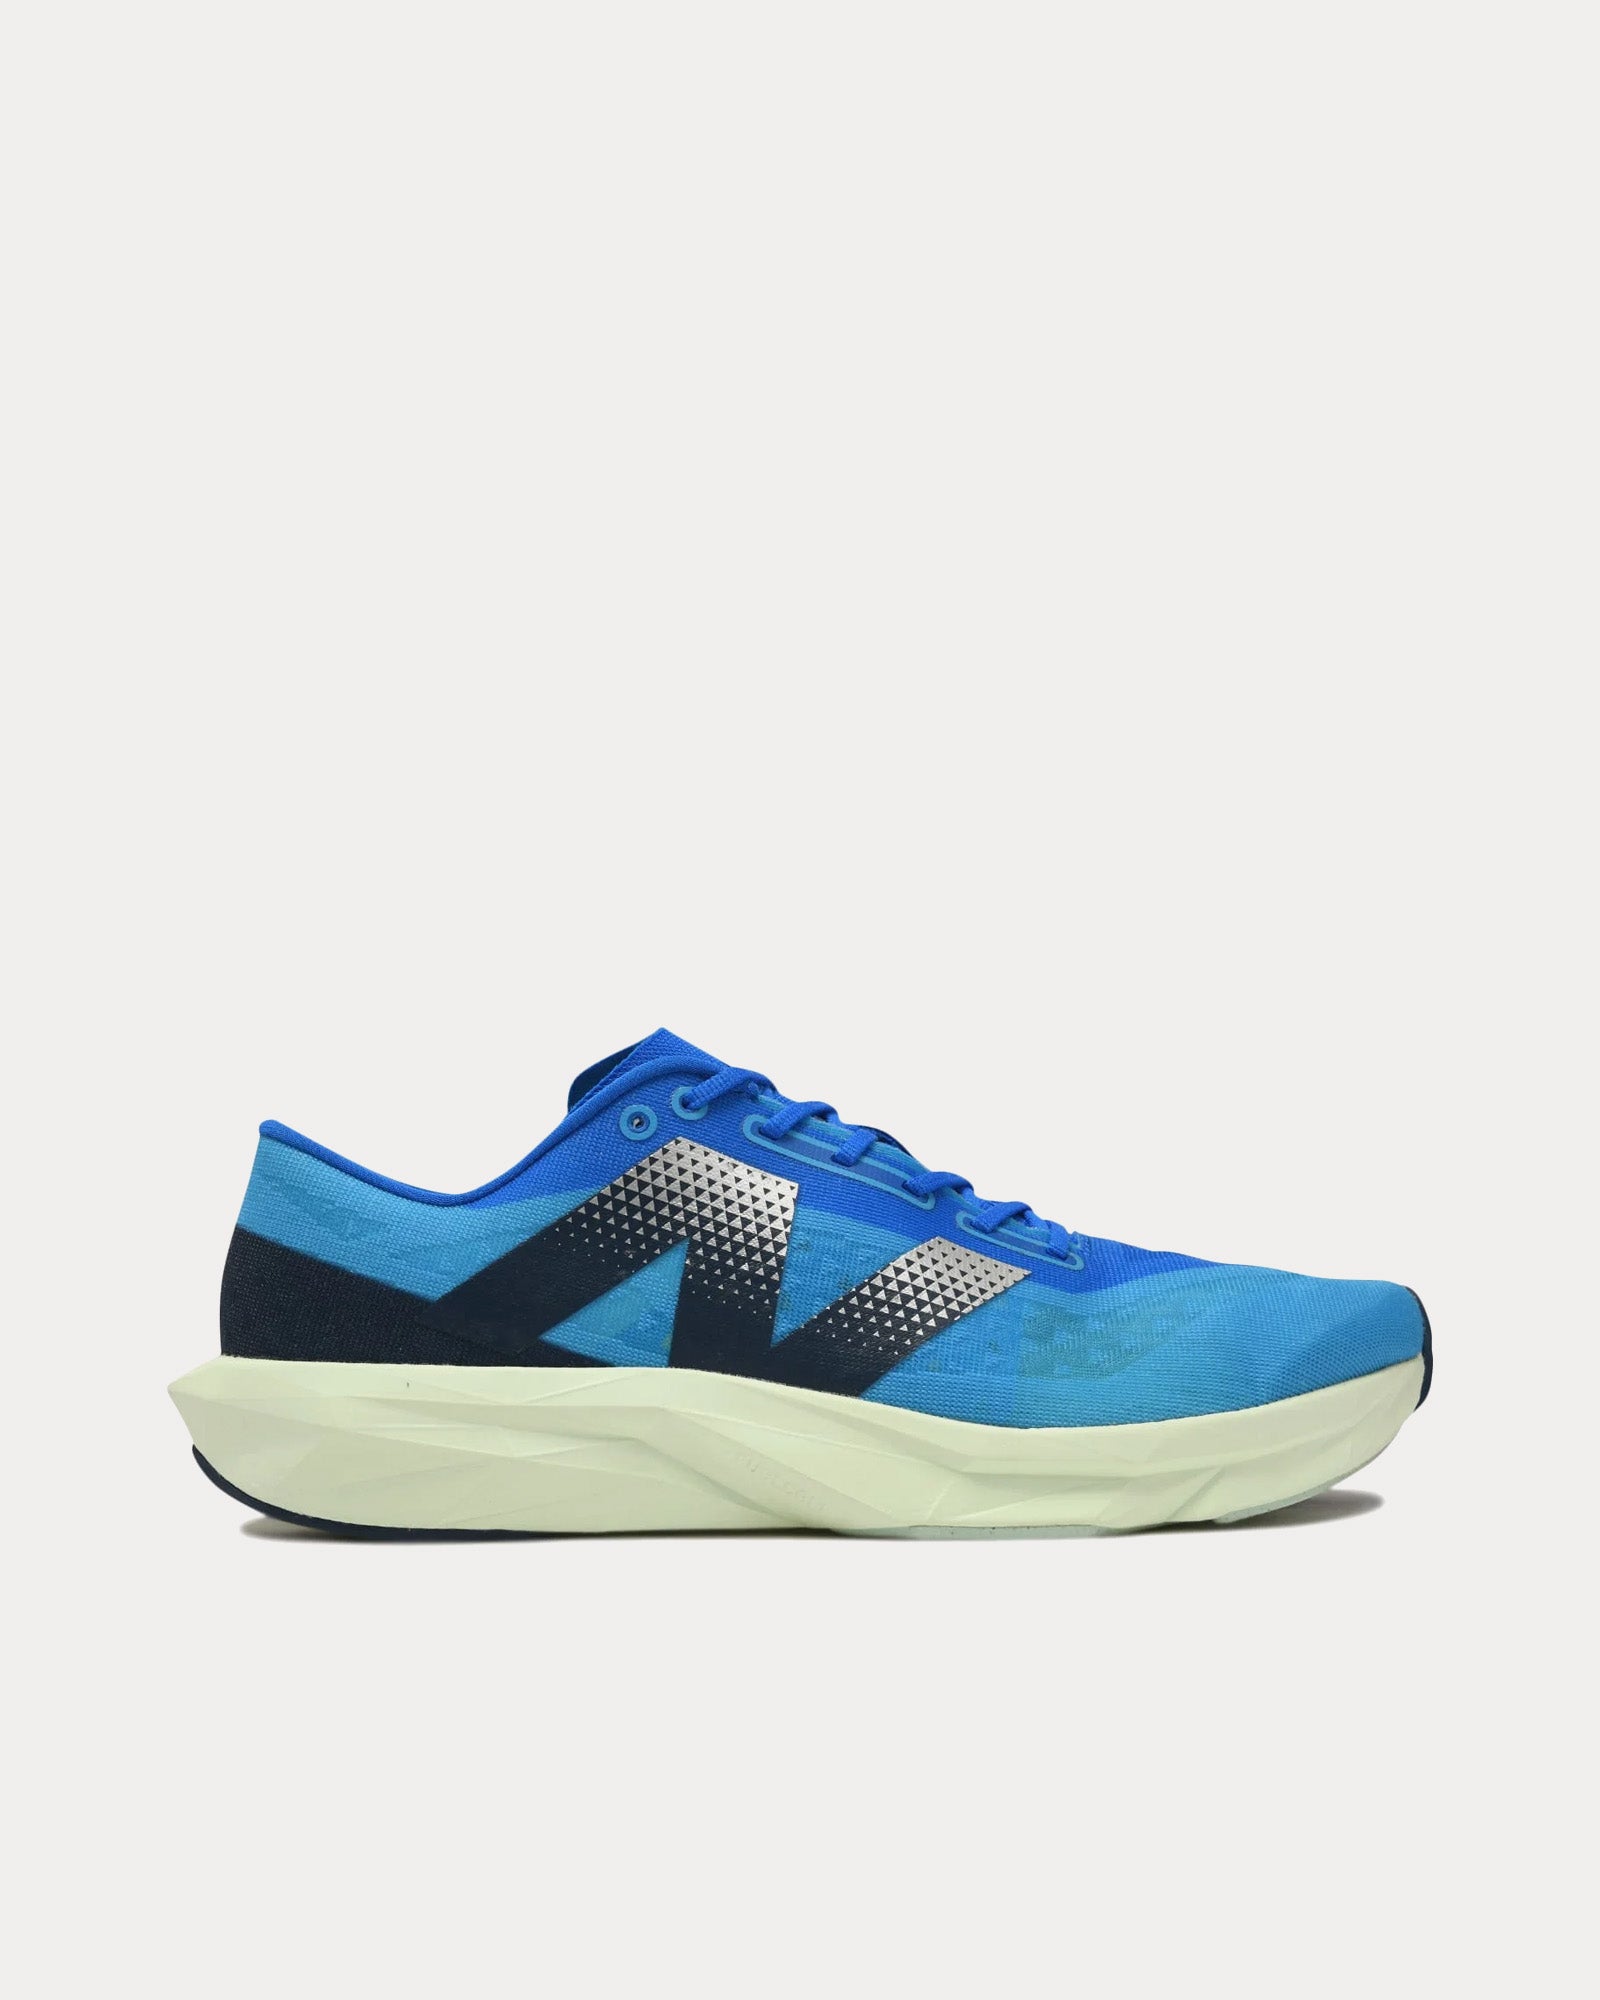 FuelCell Pvlse v1 BM Spice Blue / Limelight / Blue Oasis Running Shoes